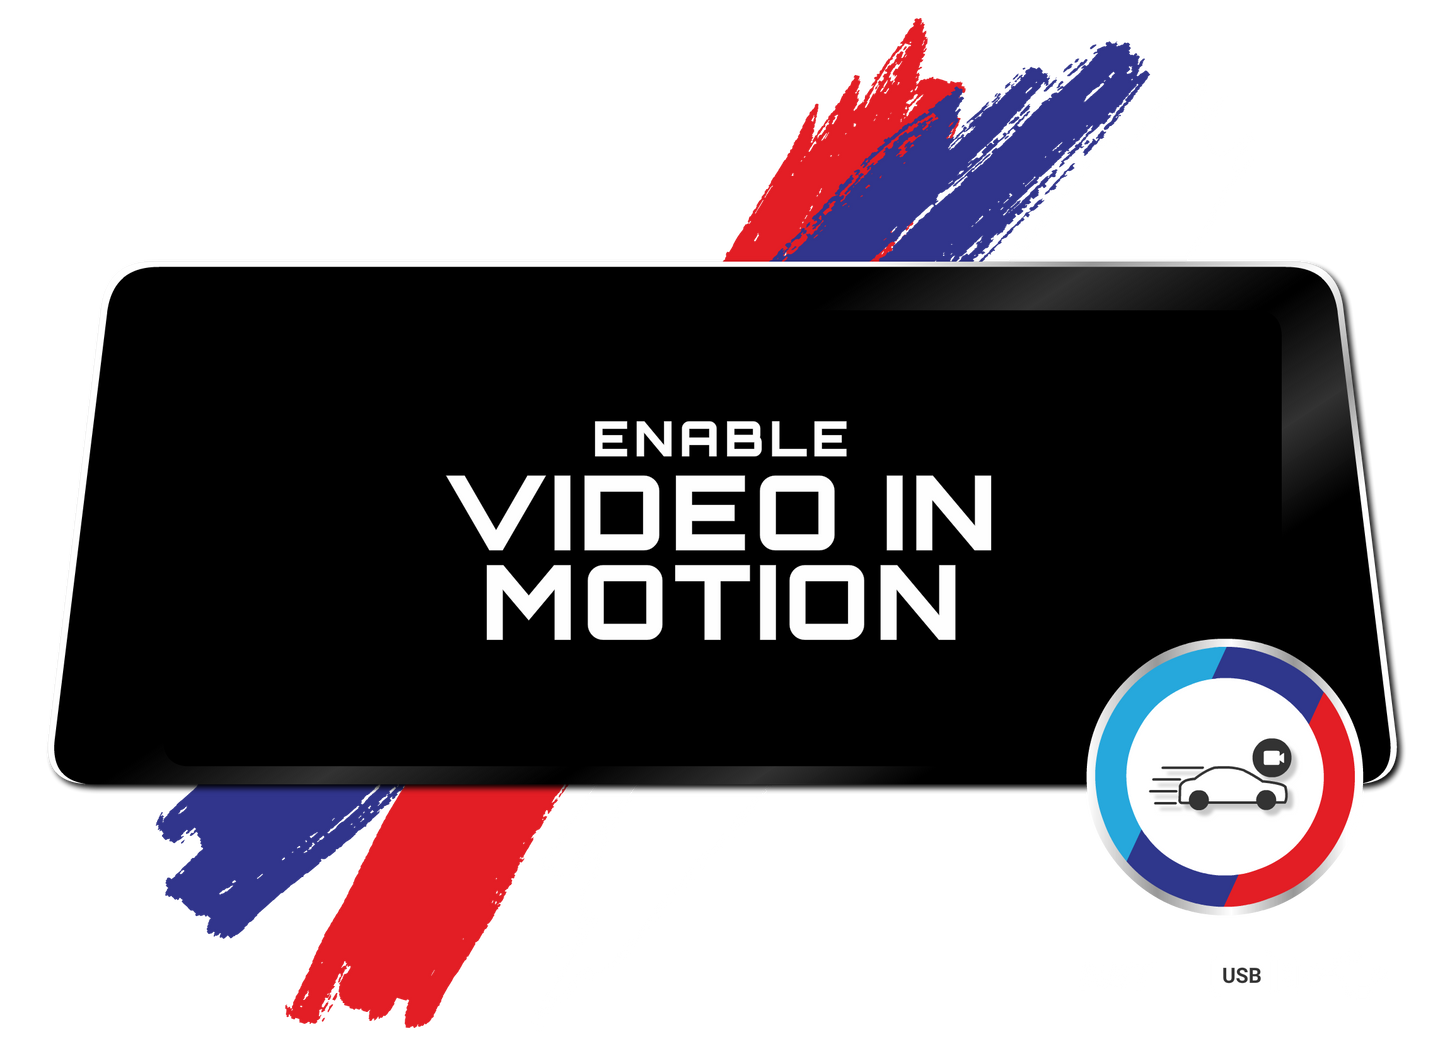 activate video in motion on any bmw car